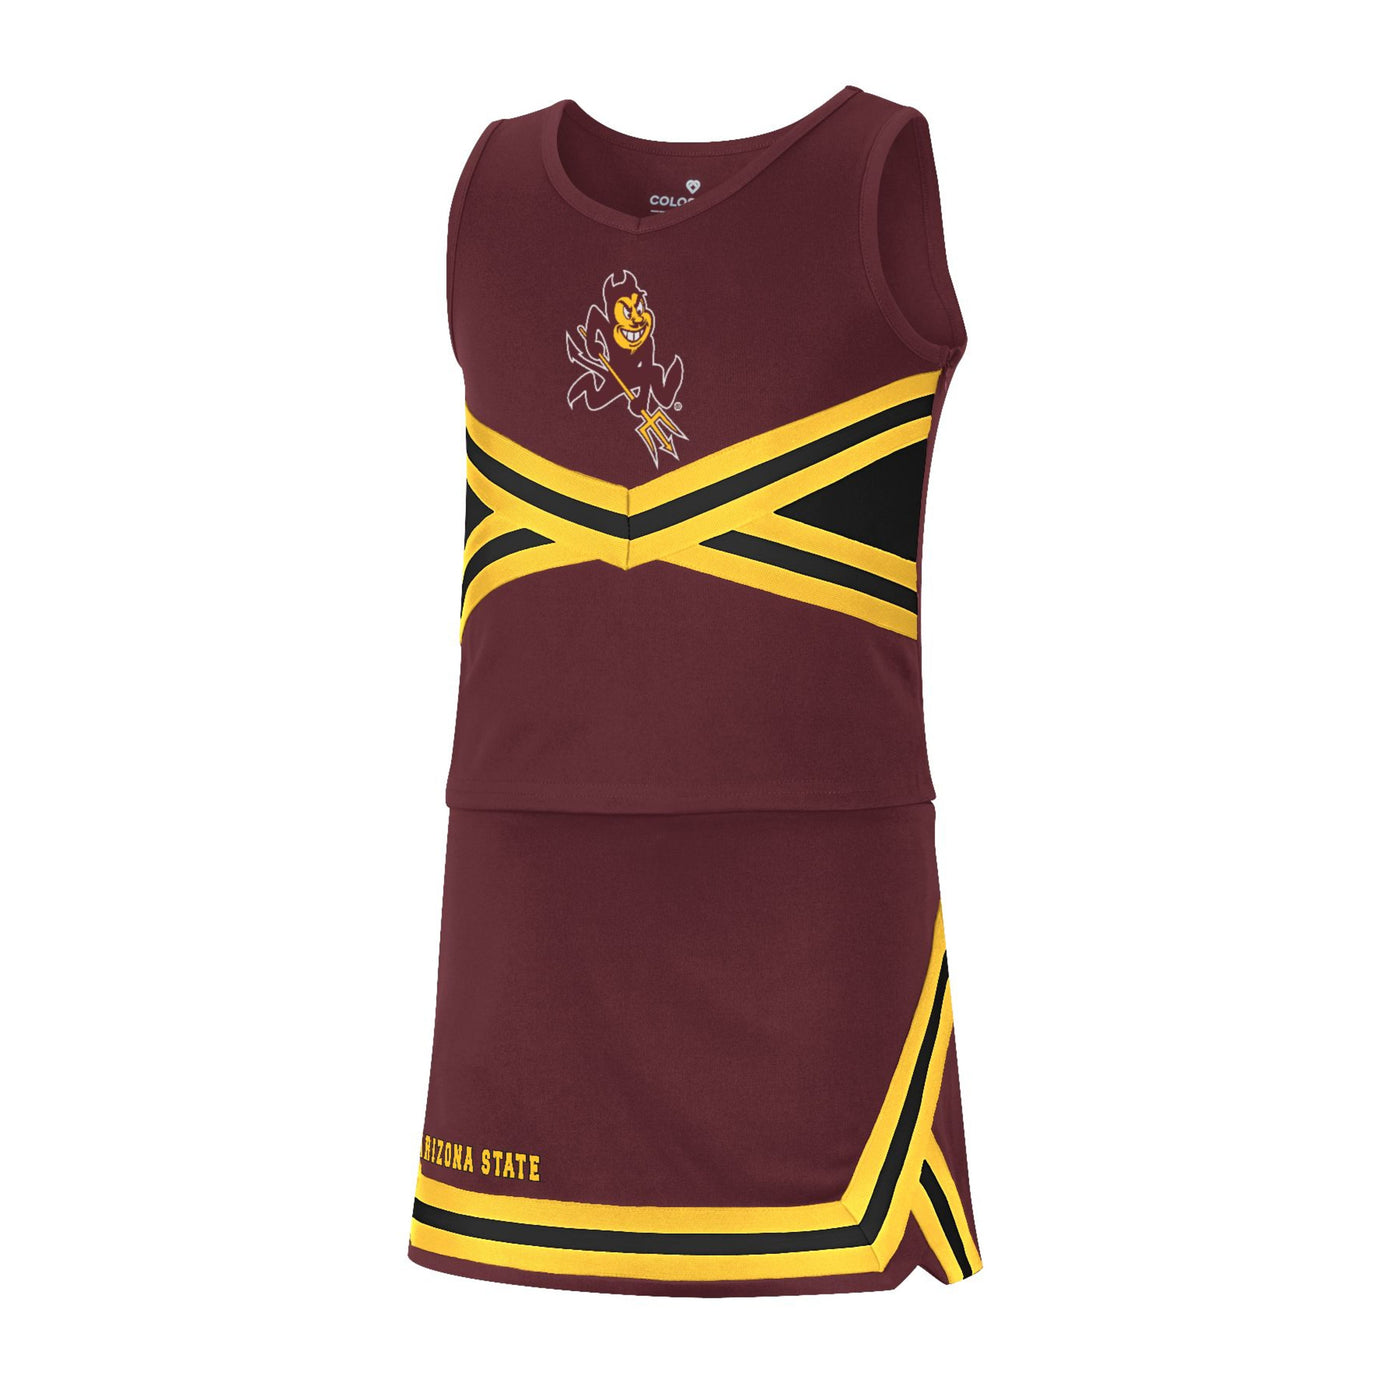 ASU maroon cheer uniform featuring ASU's sparky logo on the chest.  It also features black and gold stripes on the top and skirt. Skirt includes small arizona state text above the hem. 